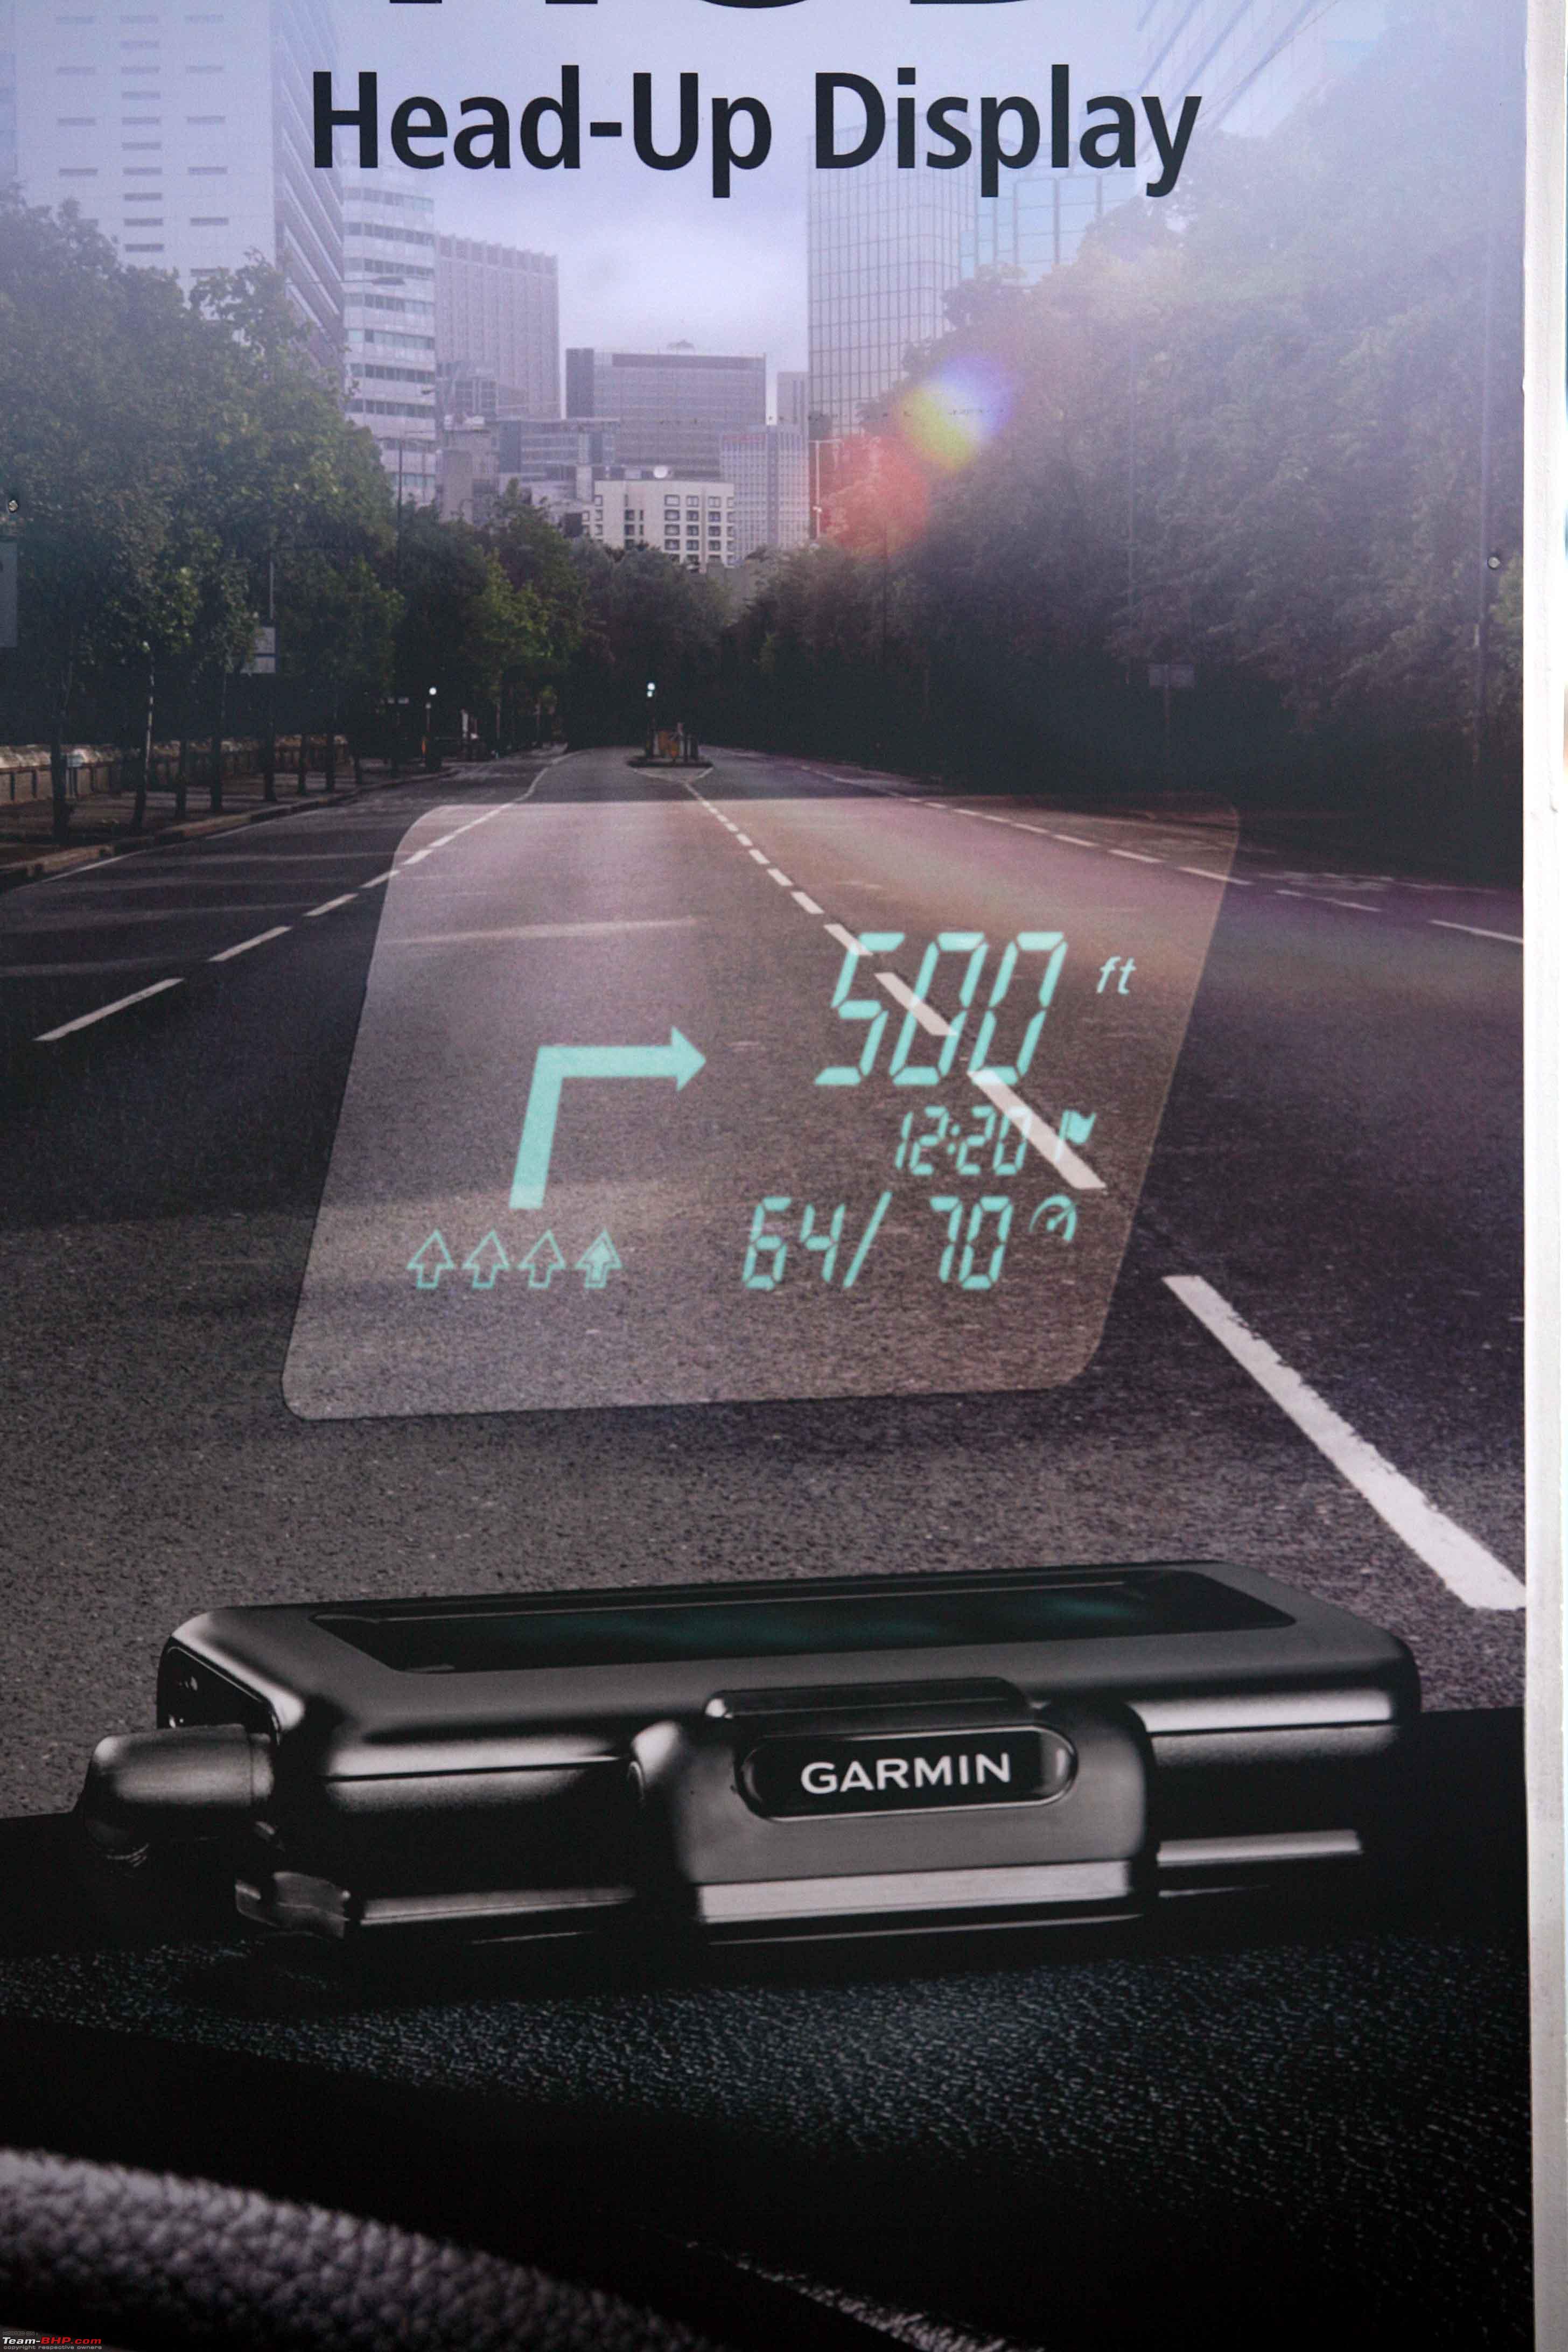 https://www.team-bhp.com/forum/attachments/modifications-accessories/1207426d1392204460-garmin-launches-head-up-display-rs-15-000-img_2856.jpg